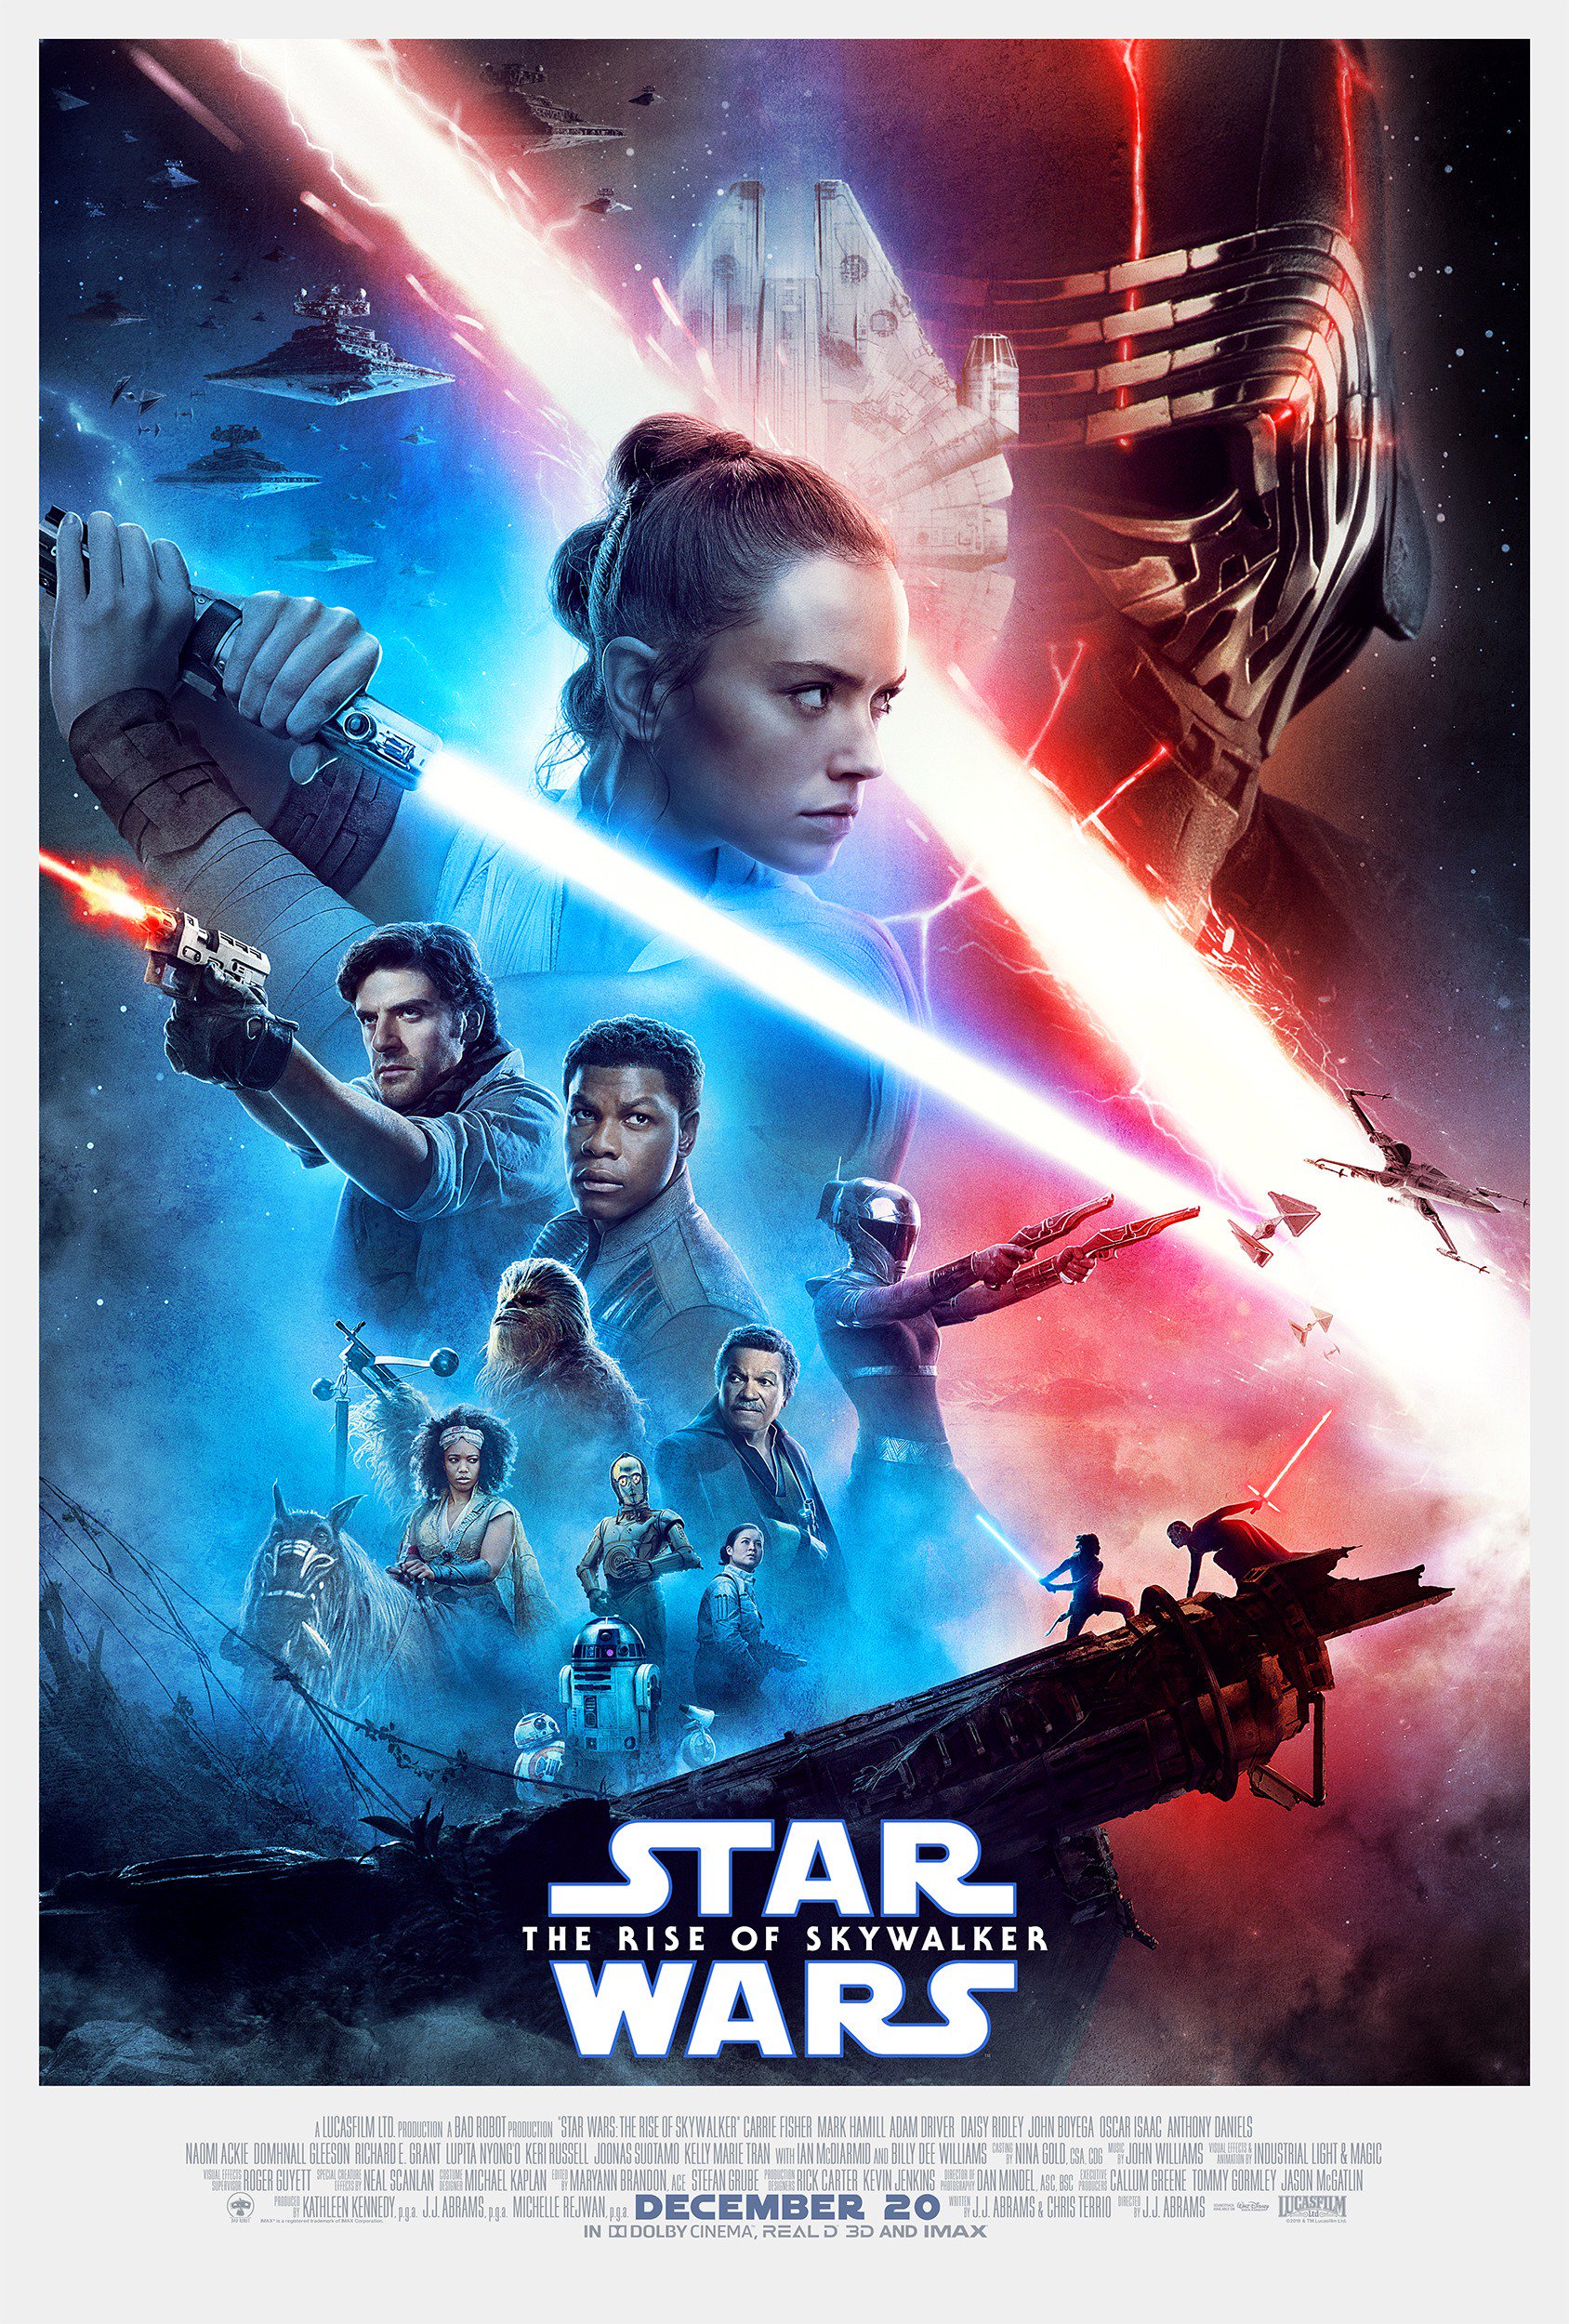 New Theatrical Poster Revealed For Star Wars The Rise Of Skywalker